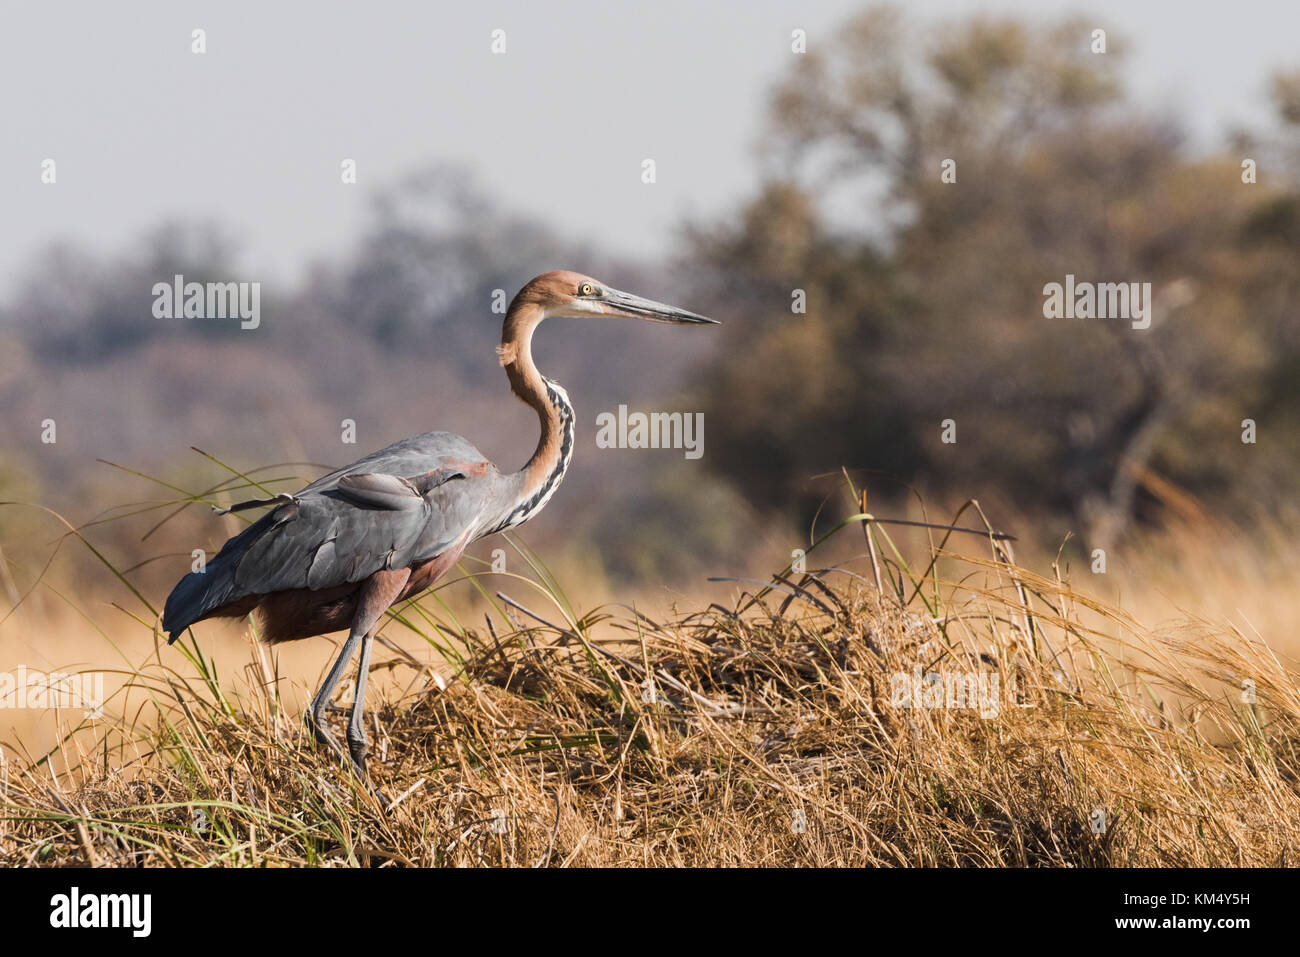 Goliath heron (Ardea goliath) standing in grass along river edge Bwabwata National Park, Namibia Stock Photo